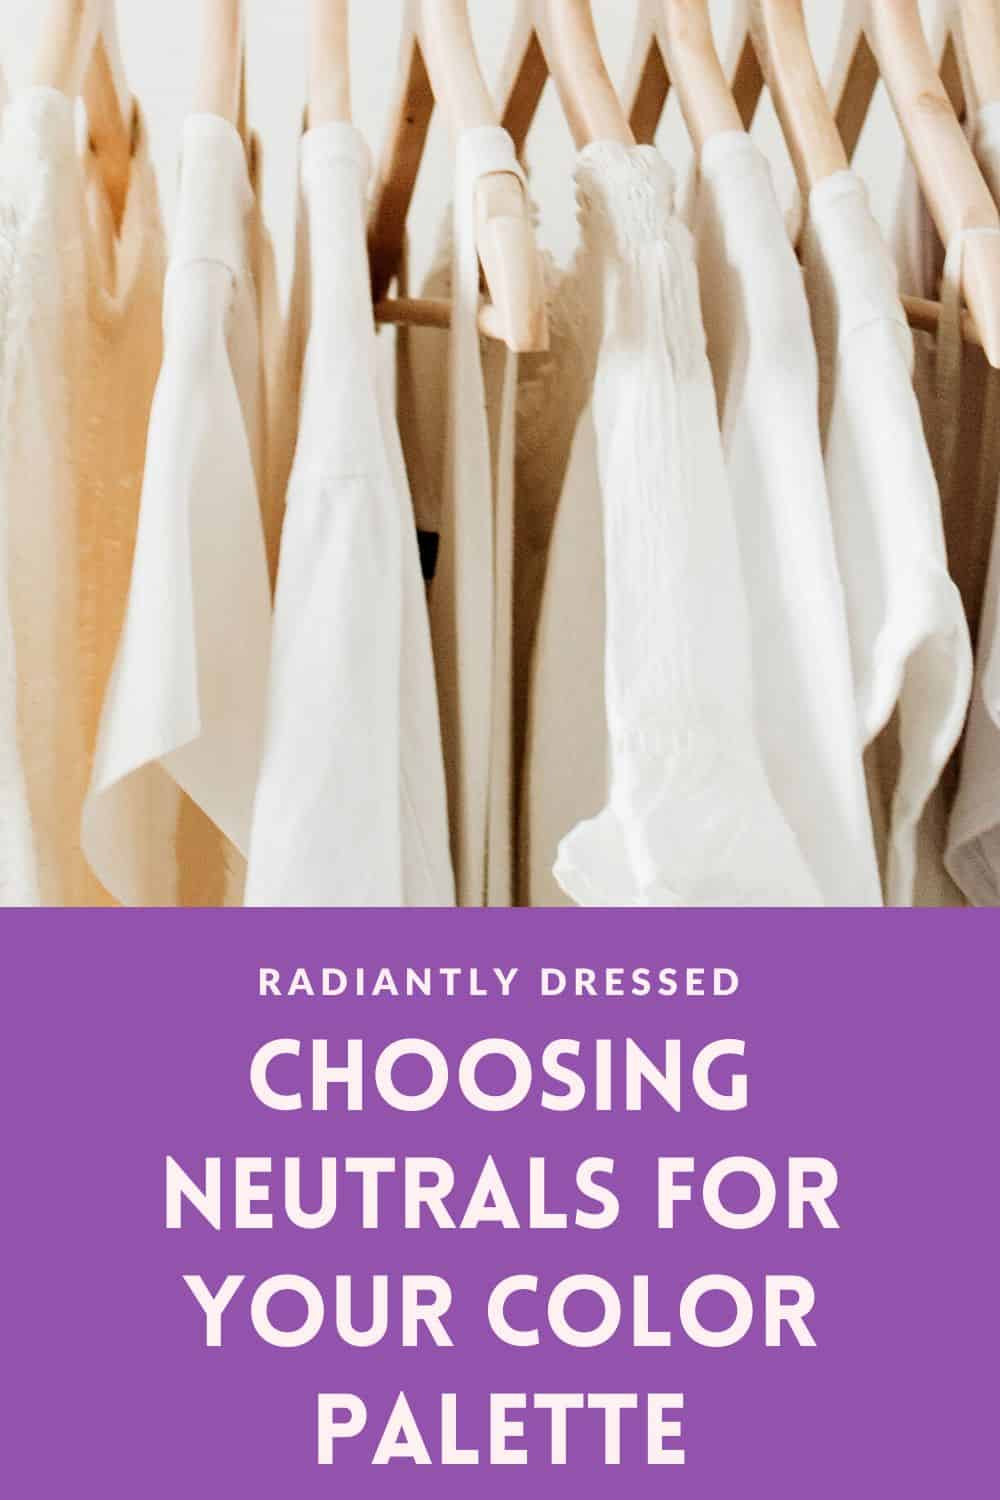 How to Choose the Perfect Color Palette Neutrals for Your Wardrobe